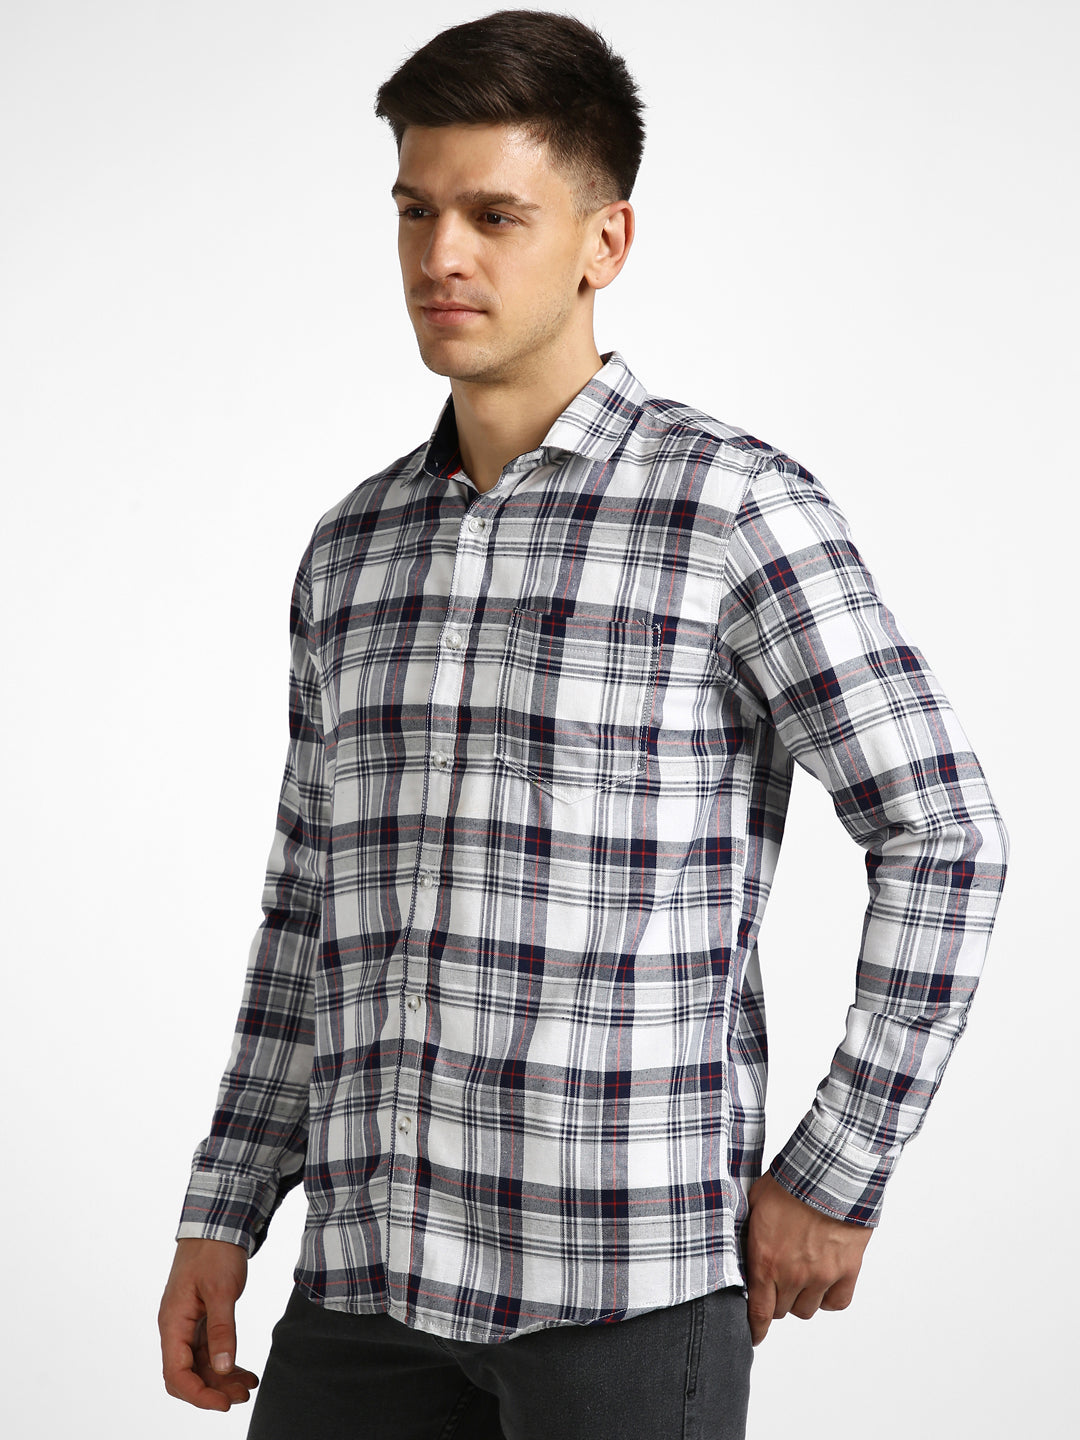 Urbano Fashion Men's White Cotton Full Sleeve Slim Fit Casual Checkered Shirt with Hooded Collar